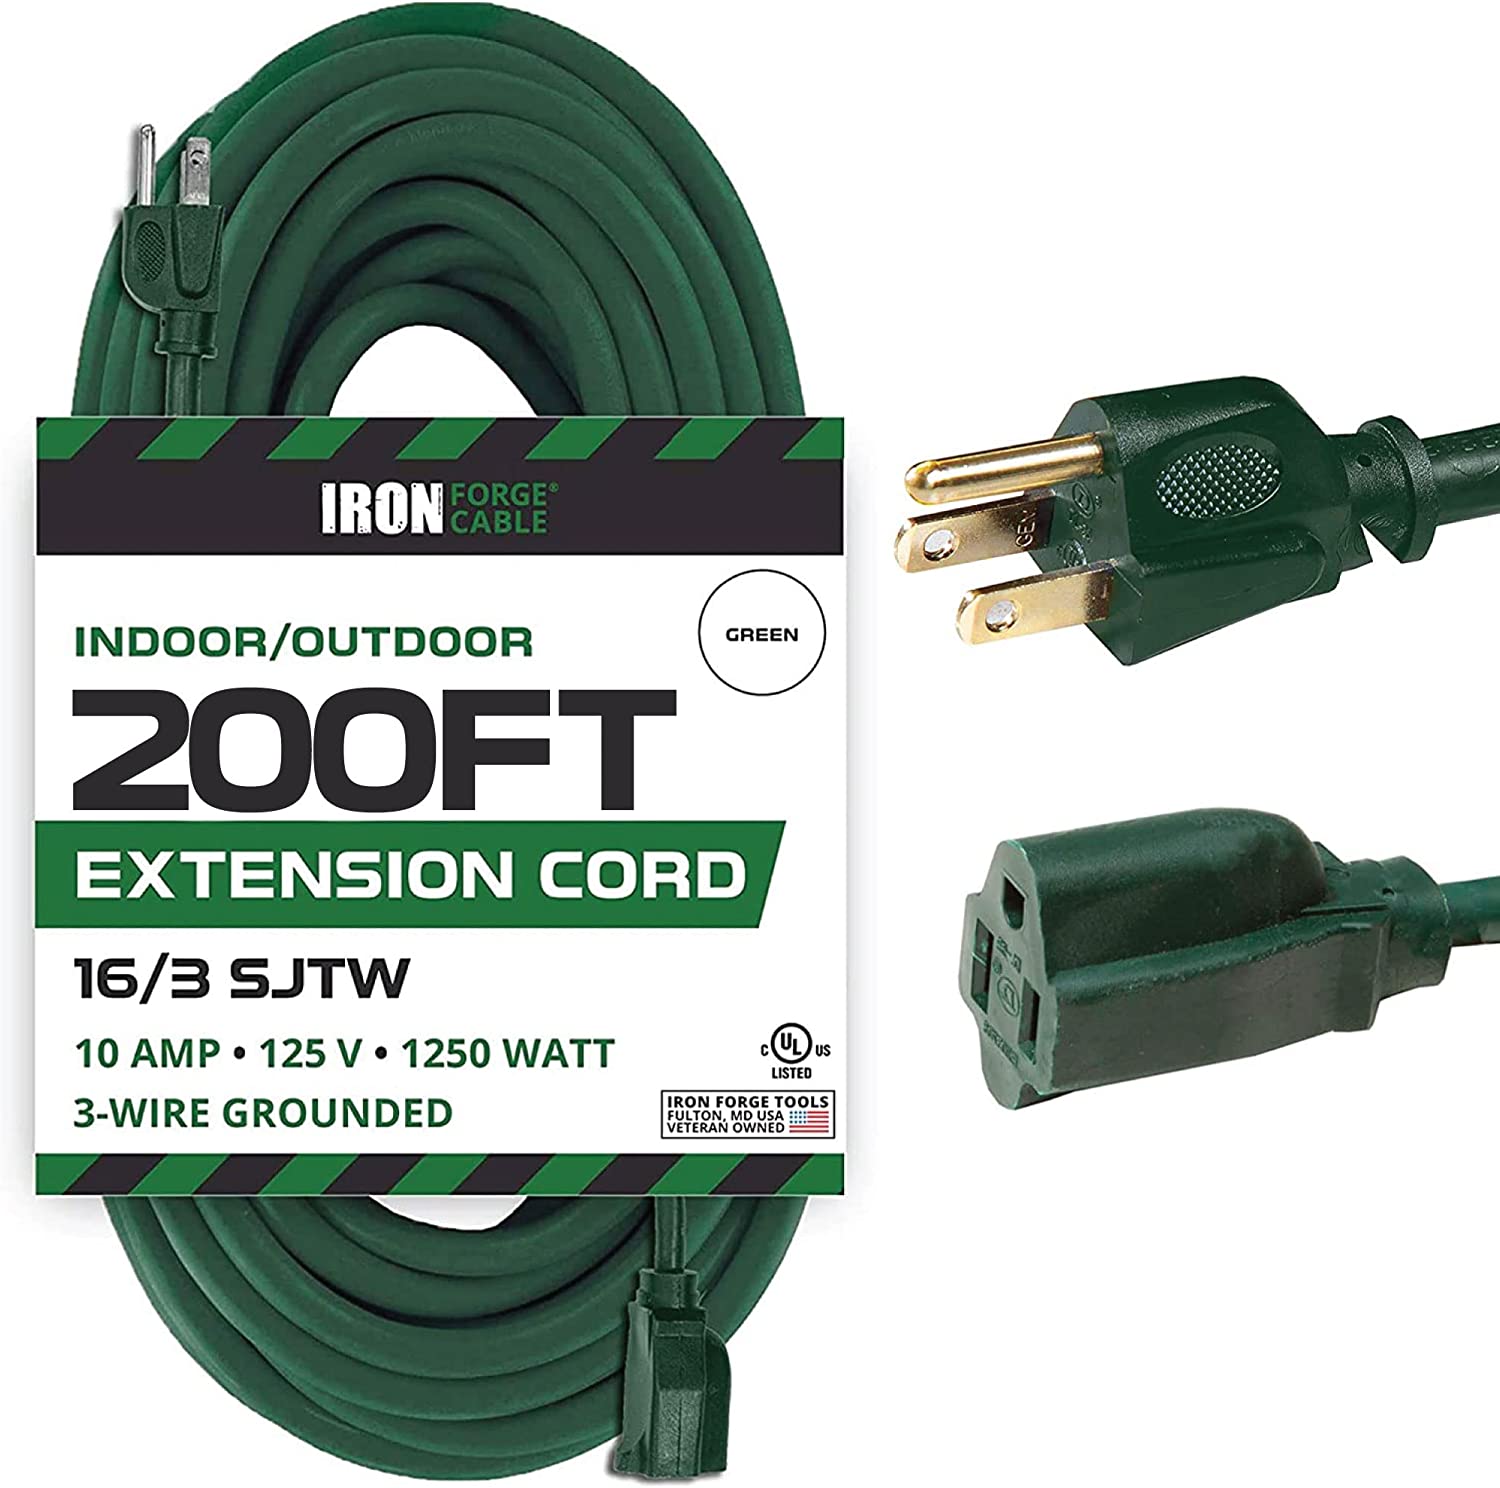 200 Ft Outdoor Extension Cord - 16/3 SJTW Durable Green Cable -3 Prong Plug